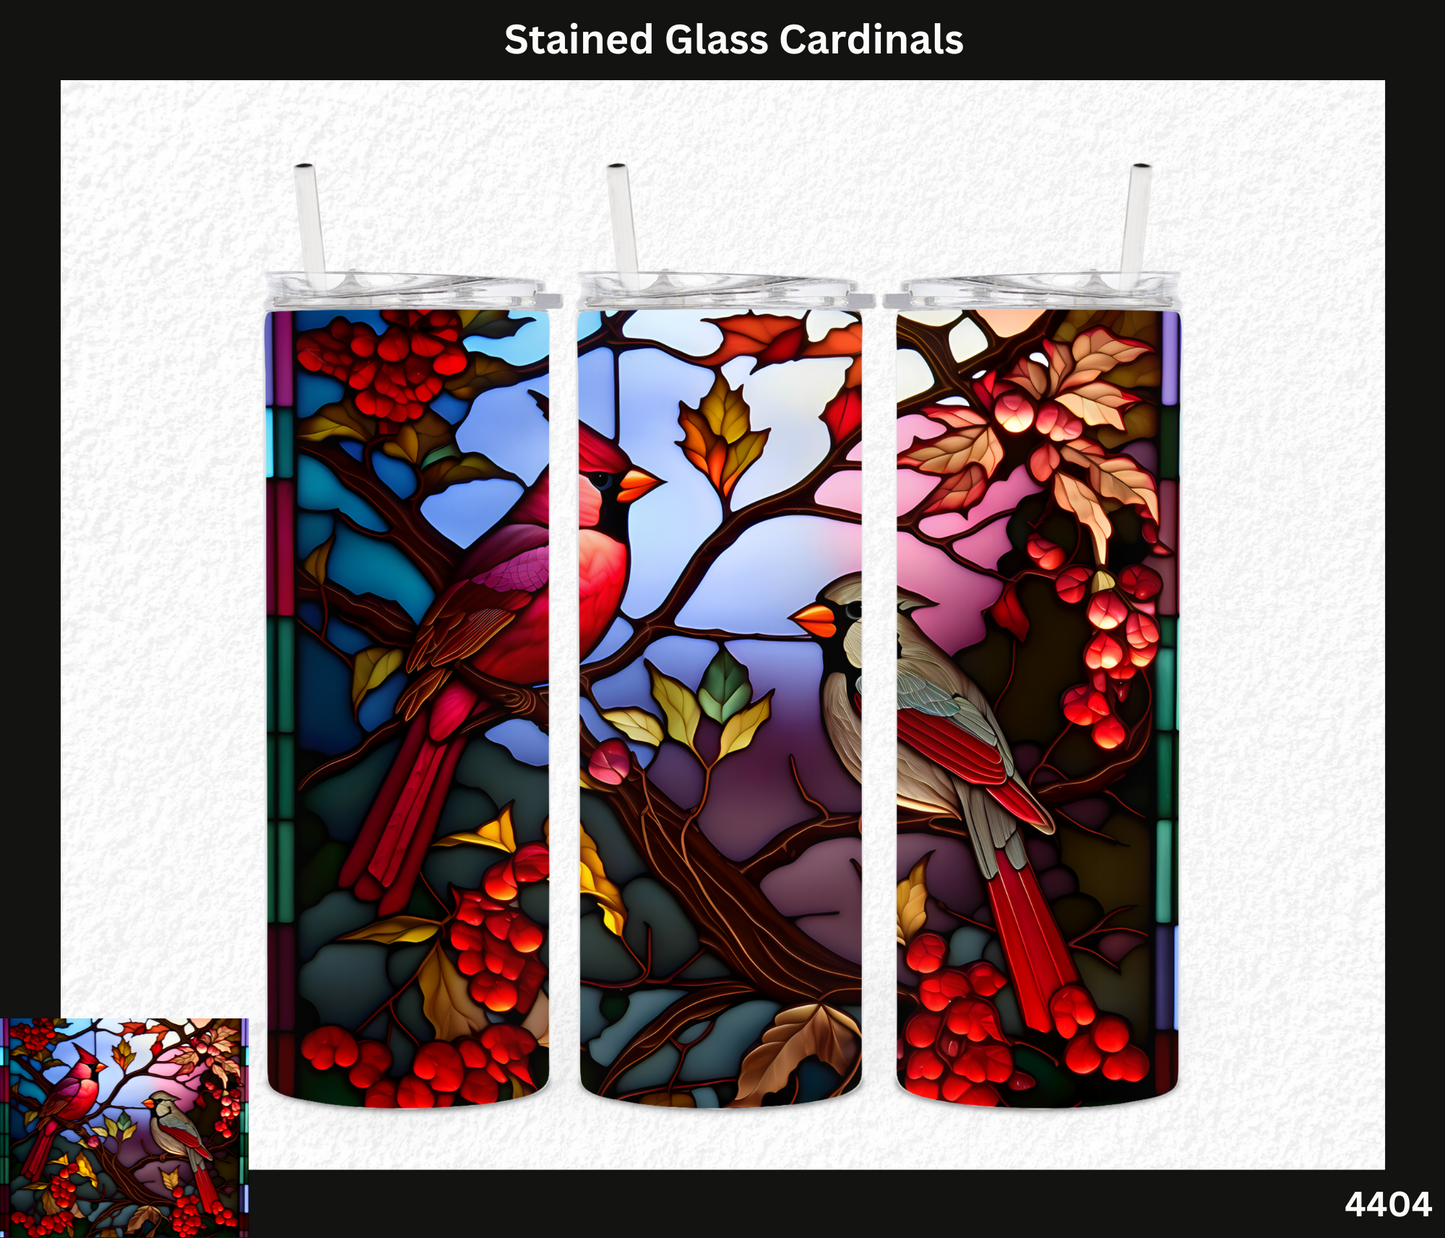 Stained Glass Cardinals